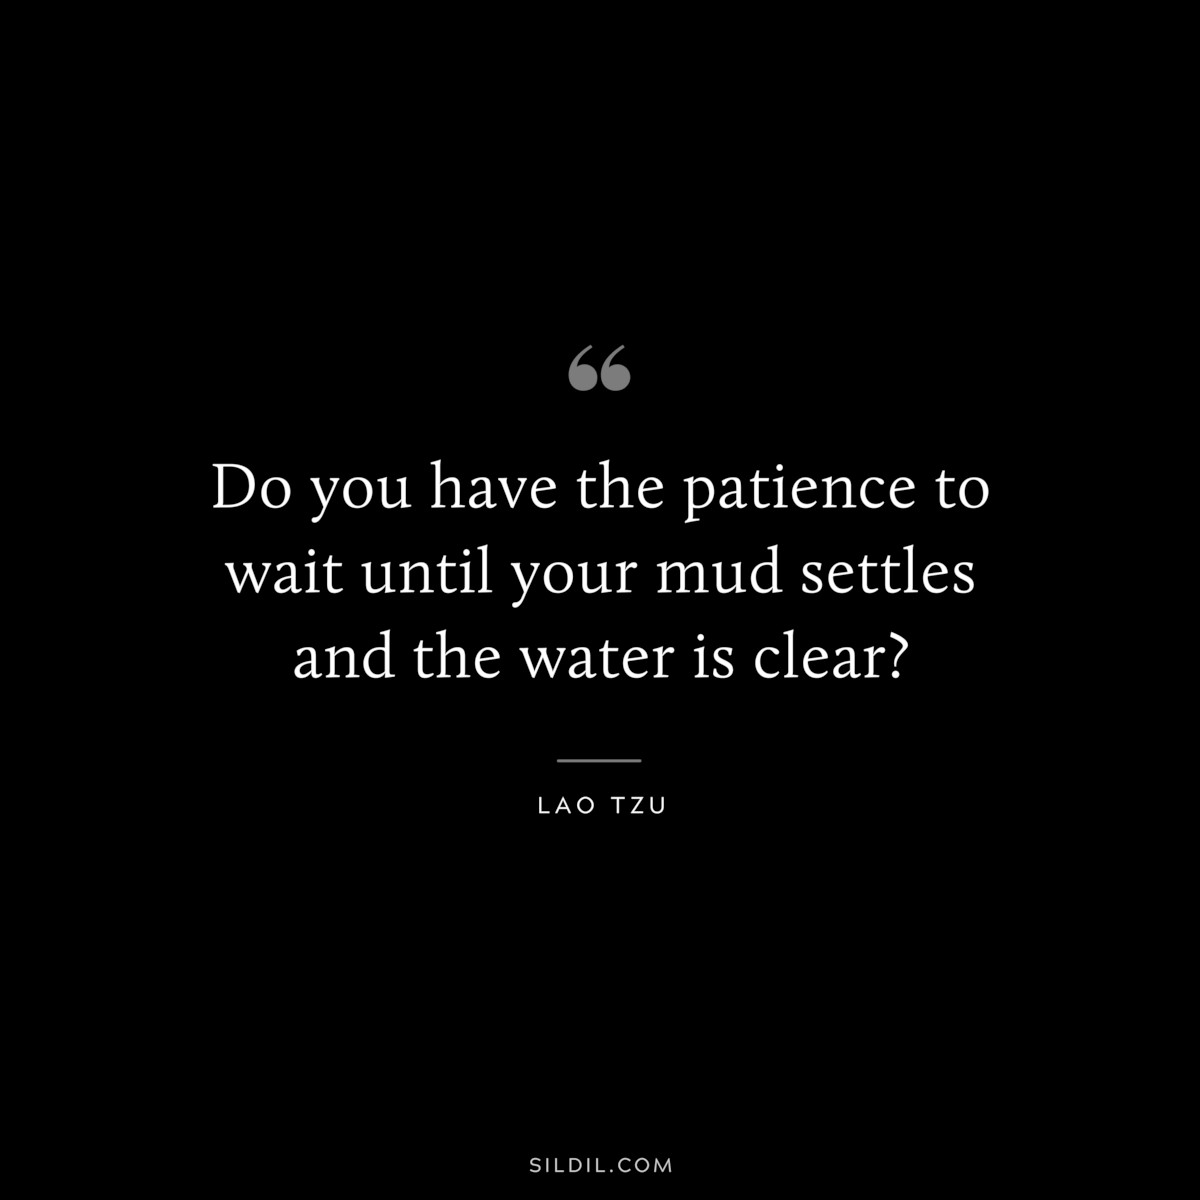 Do you have the patience to wait until your mud settles and the water is clear? ― Lao Tzu